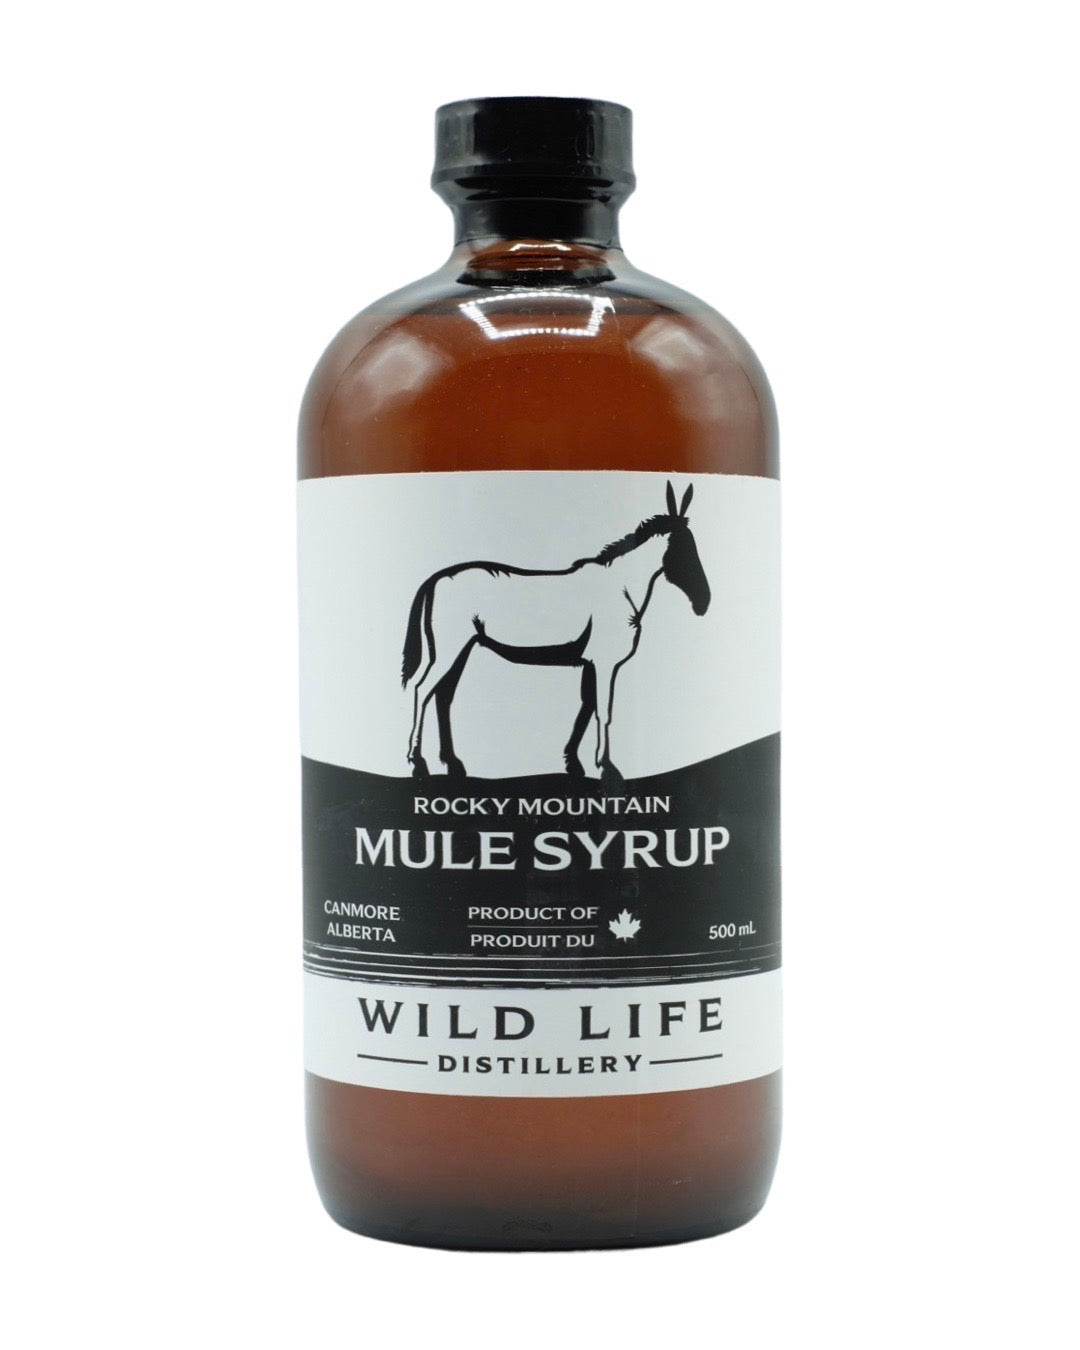 Wild Life Mule Syrup